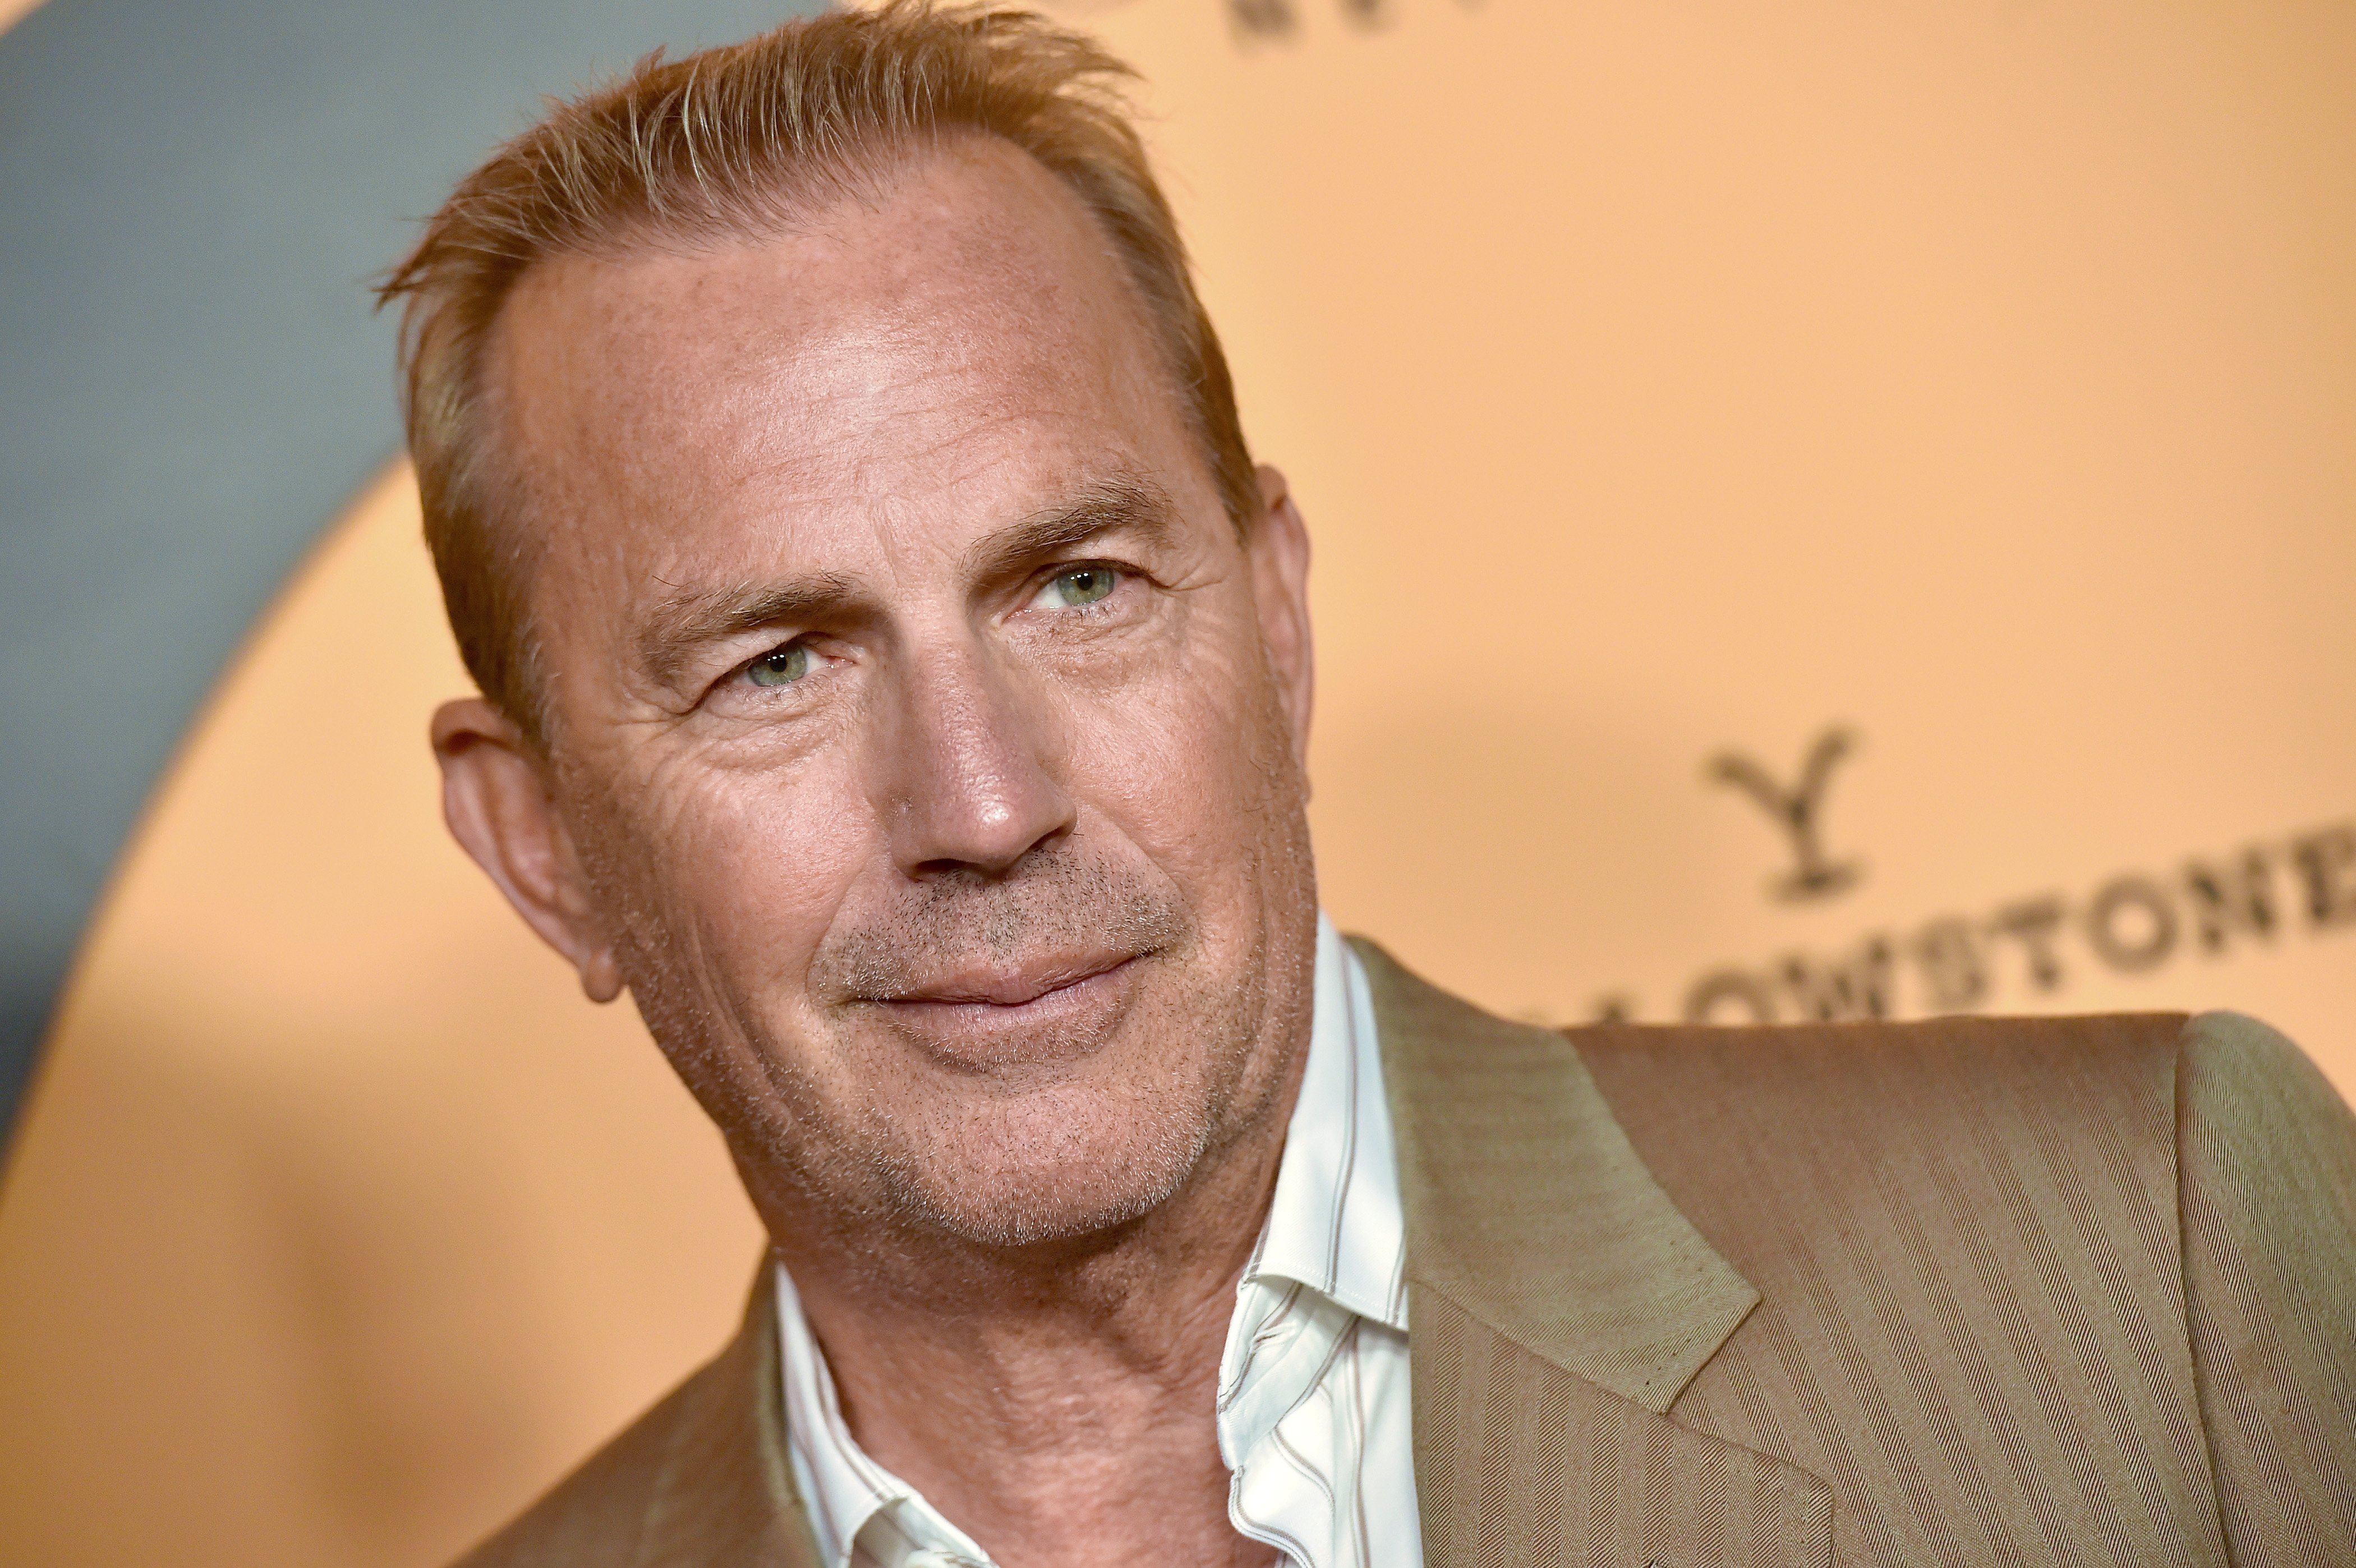 Kevin Costner attends the premiere of Yellowstone on May 30, 2019